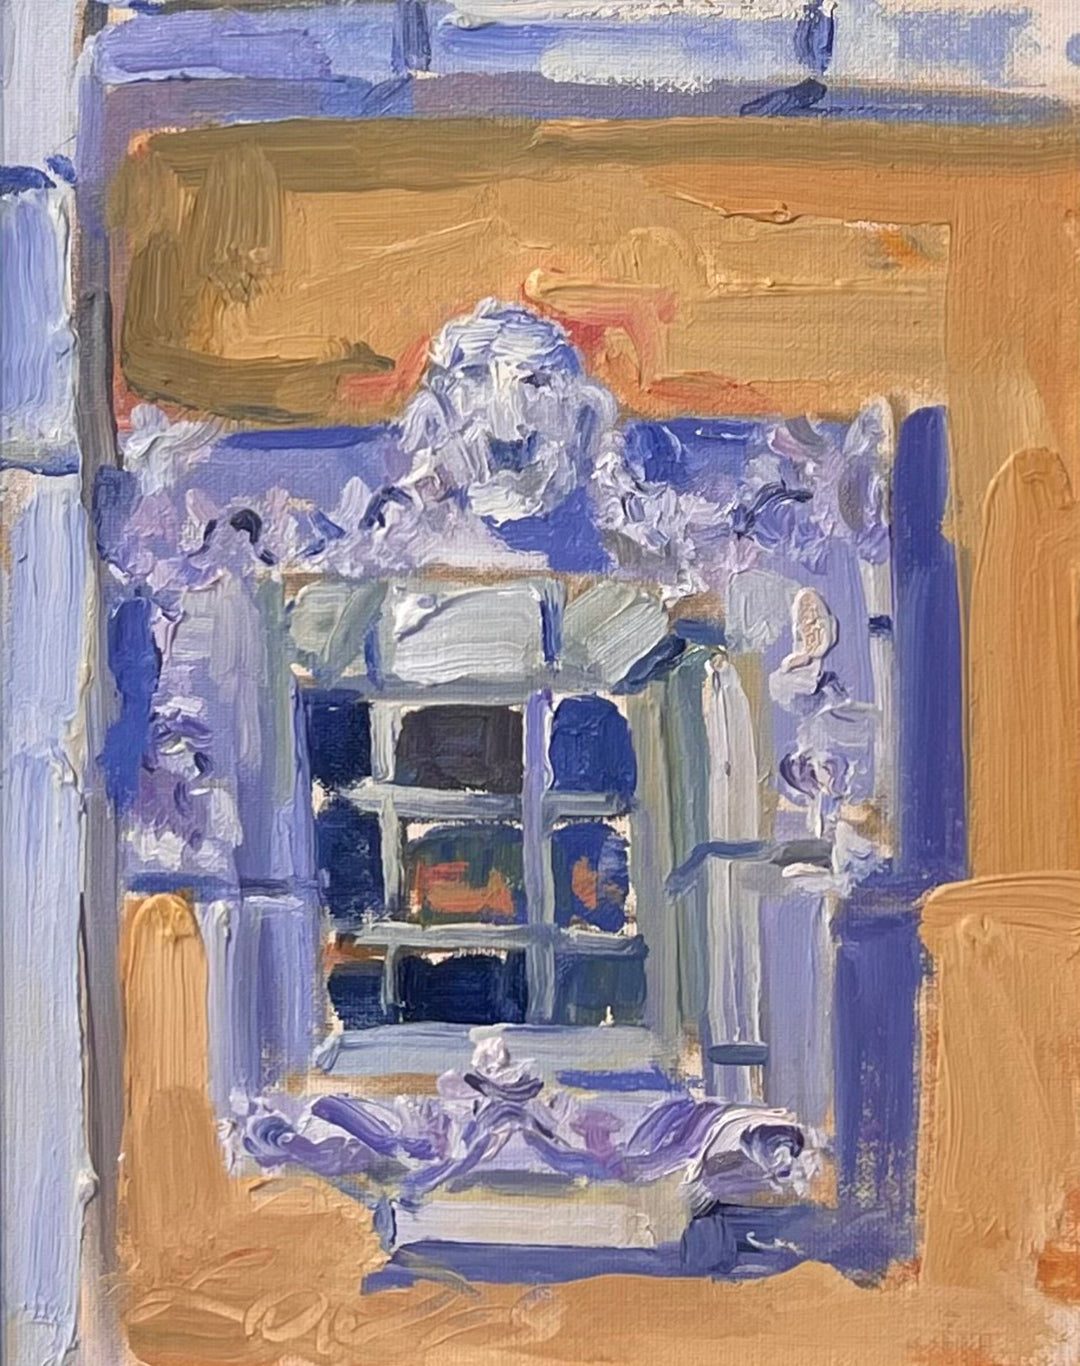 Terrie Lombardi - View From Above" is a painting by artist Terrie Lombardi depicting a window adorned with blue and white flowers.